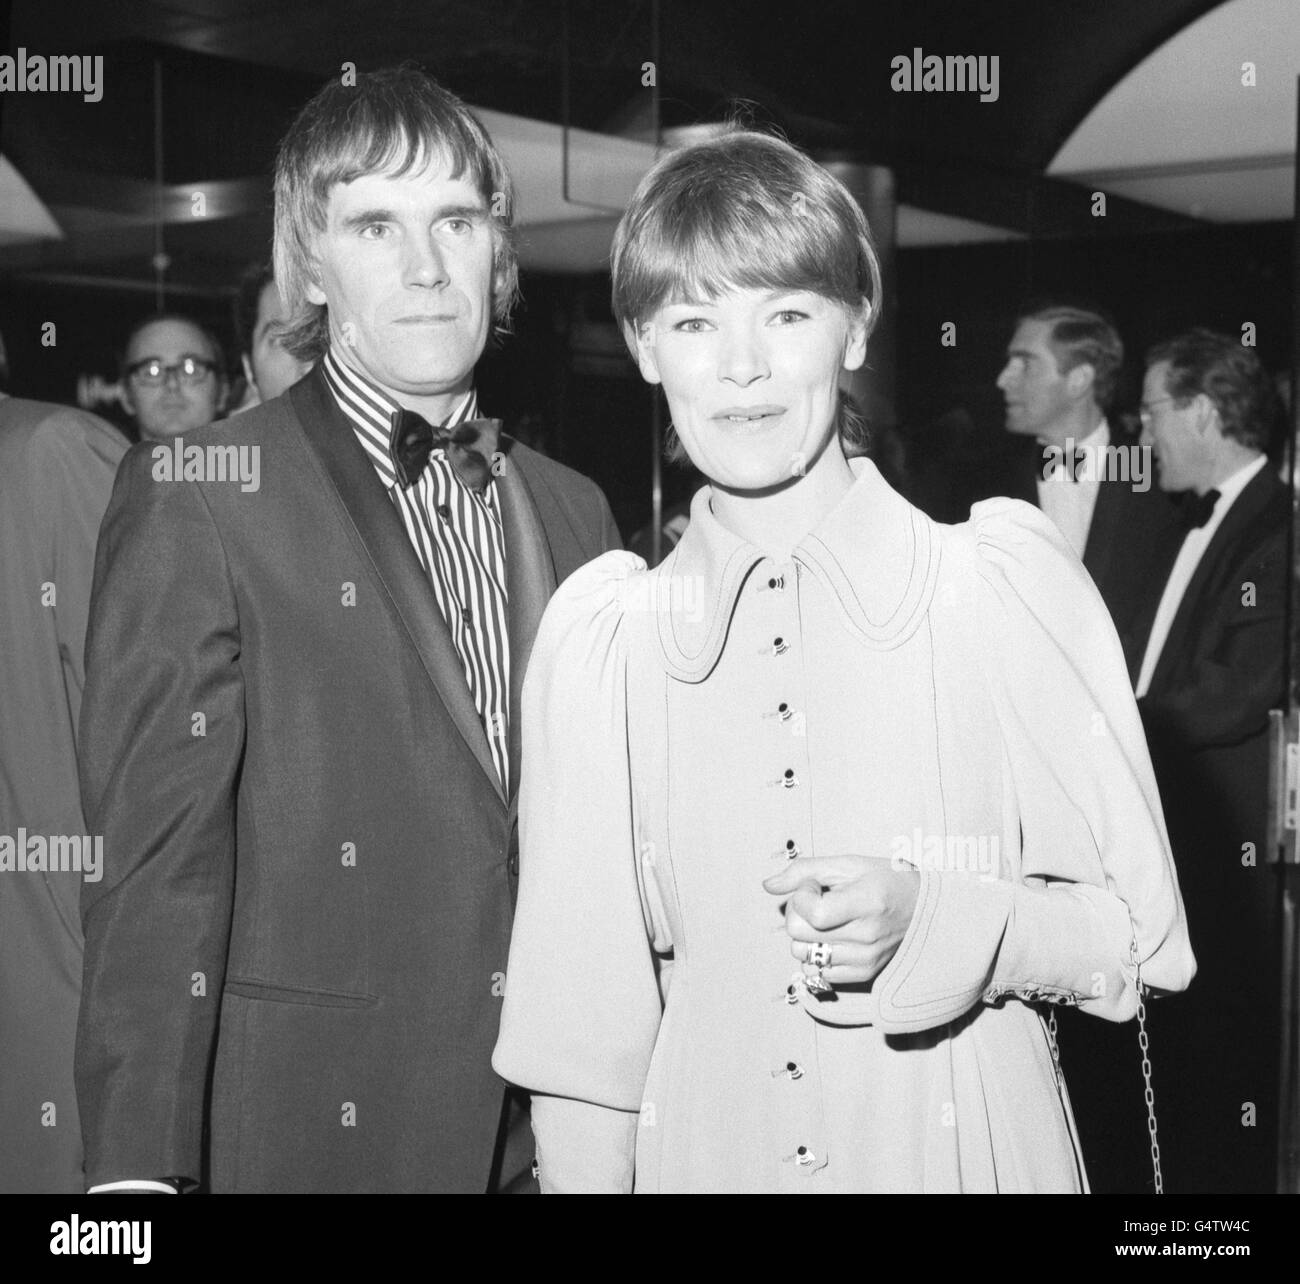 Glenda Jackson and her husband, Roy Hodges, as they arrive for the premiere of "The Triple Echo" at The Universal, Piccadilly Circus. Stock Photo